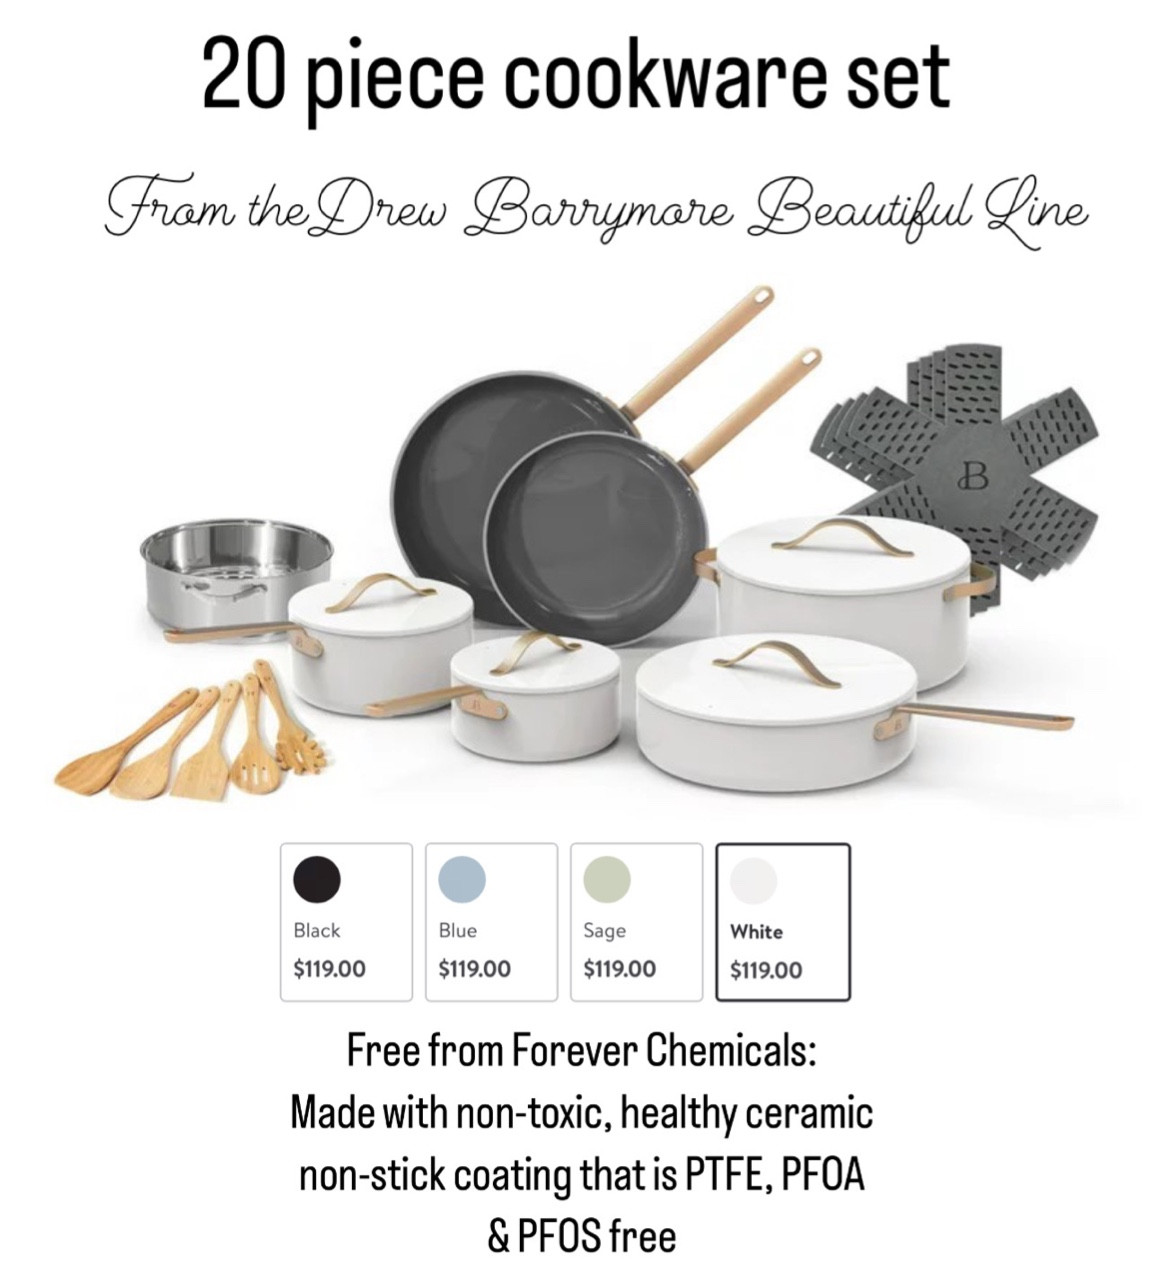 Beautiful by Drew Barrymore Ceramic Non-Stick Cookware Review